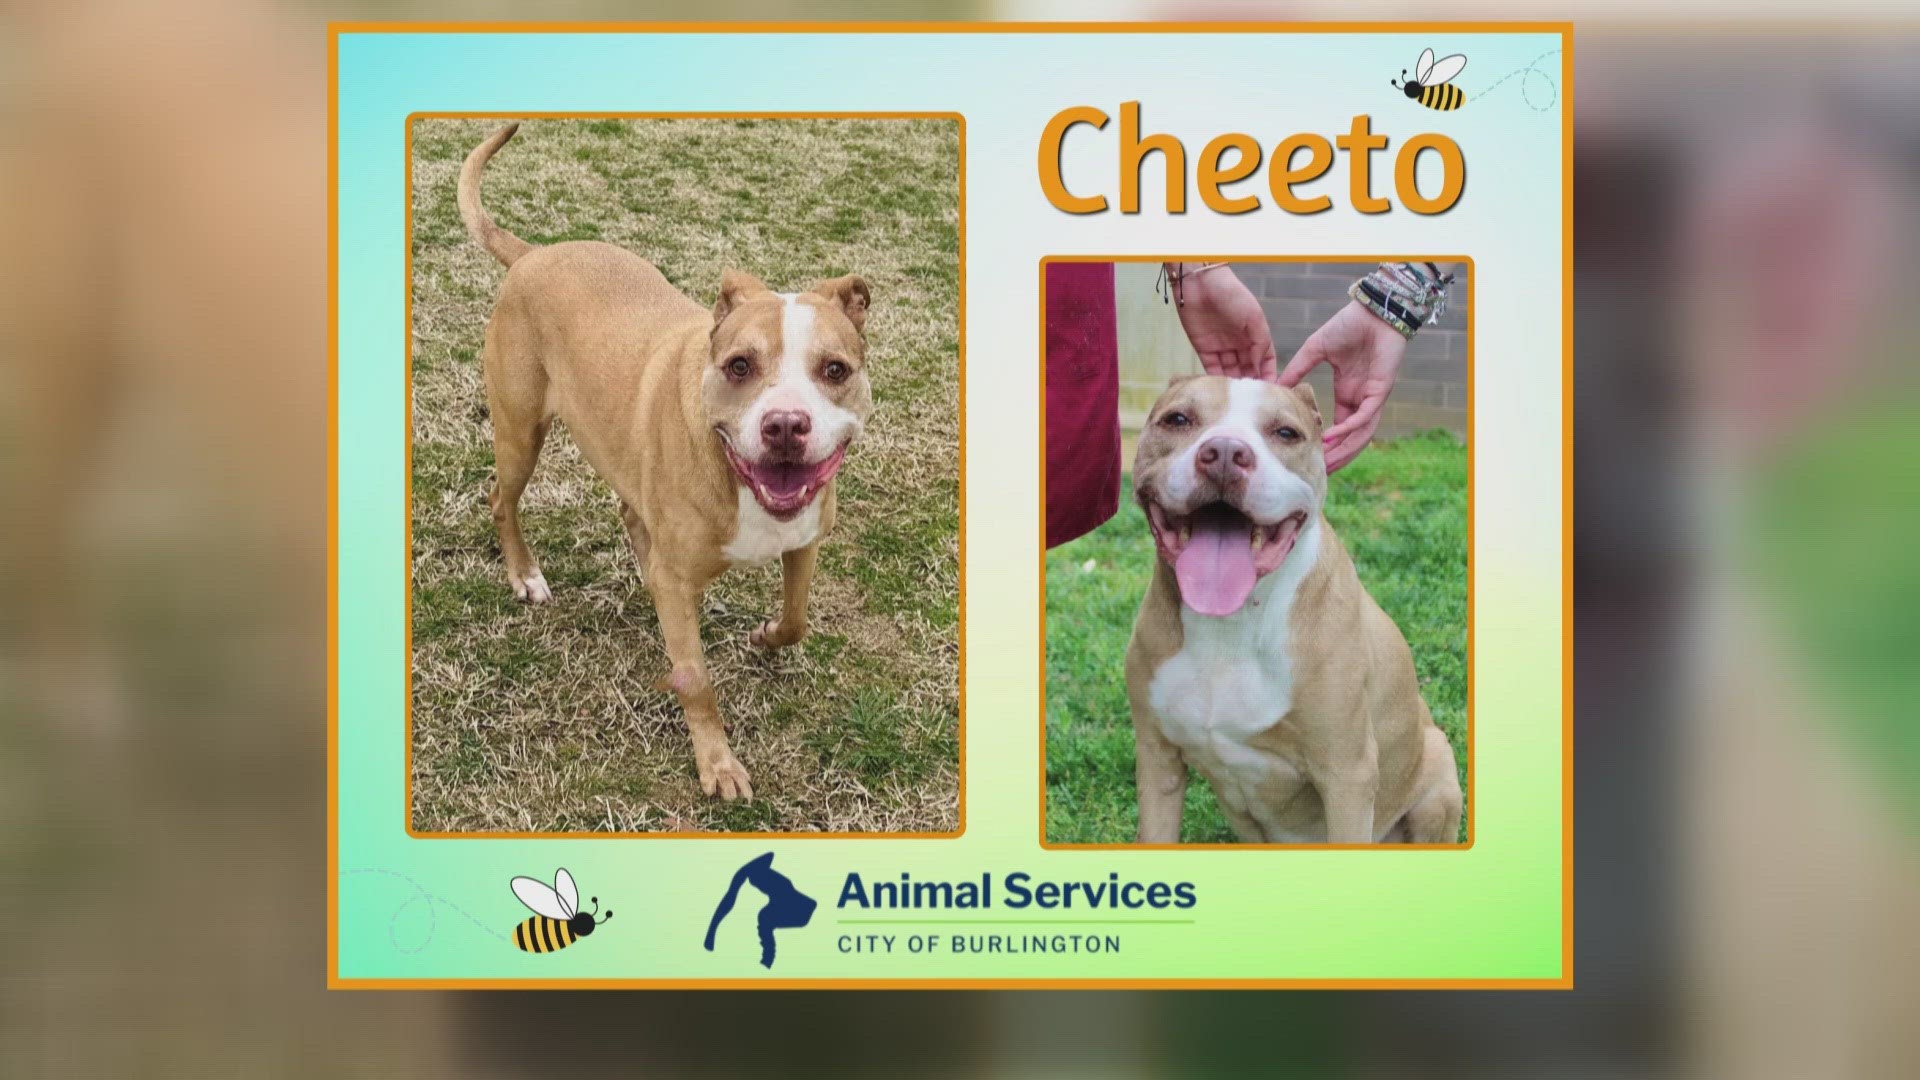 Let's get Cheeto adopted!